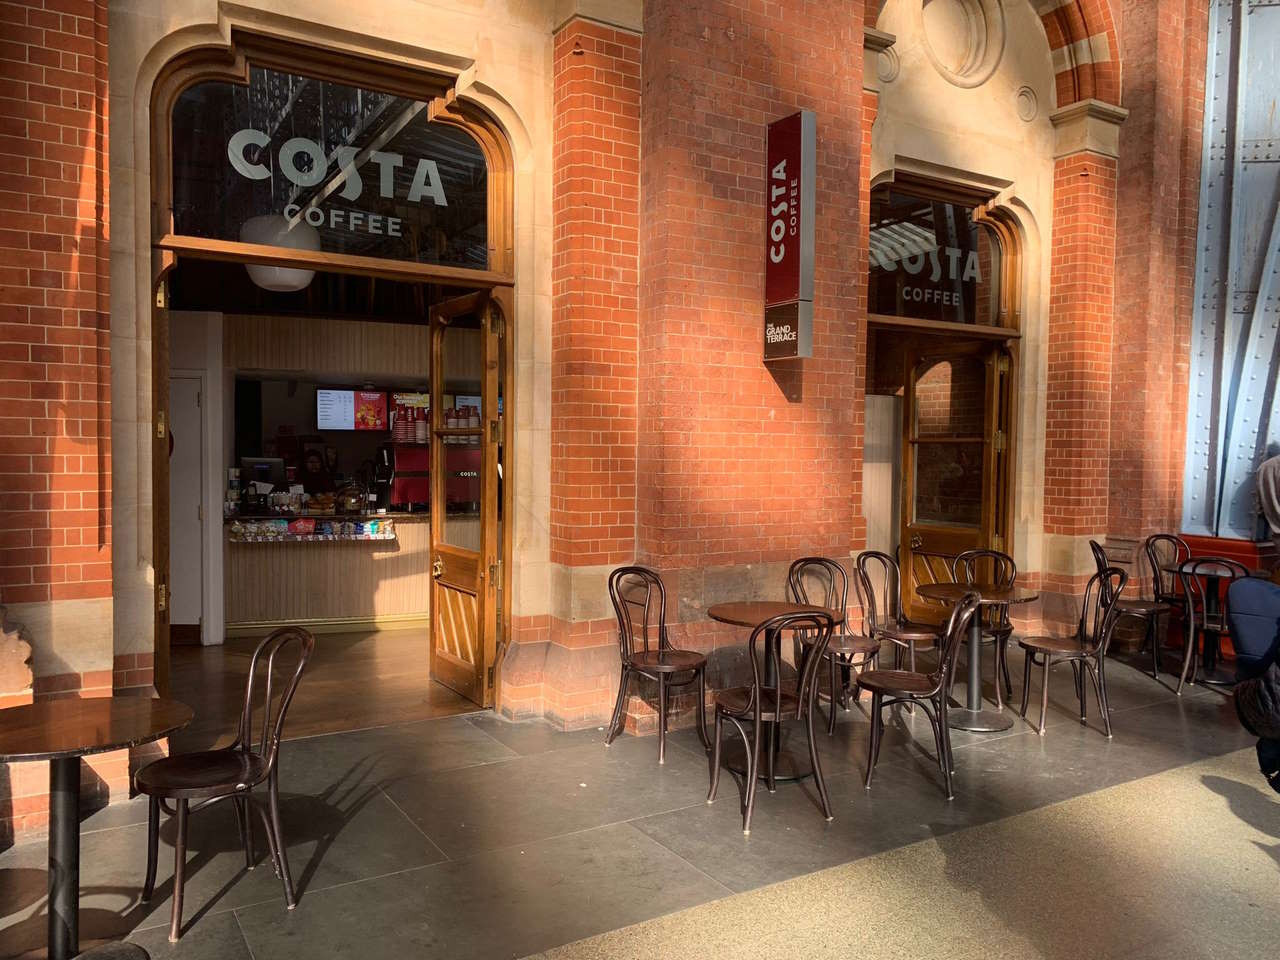 Two major London Station's get three new Costa Coffee stores